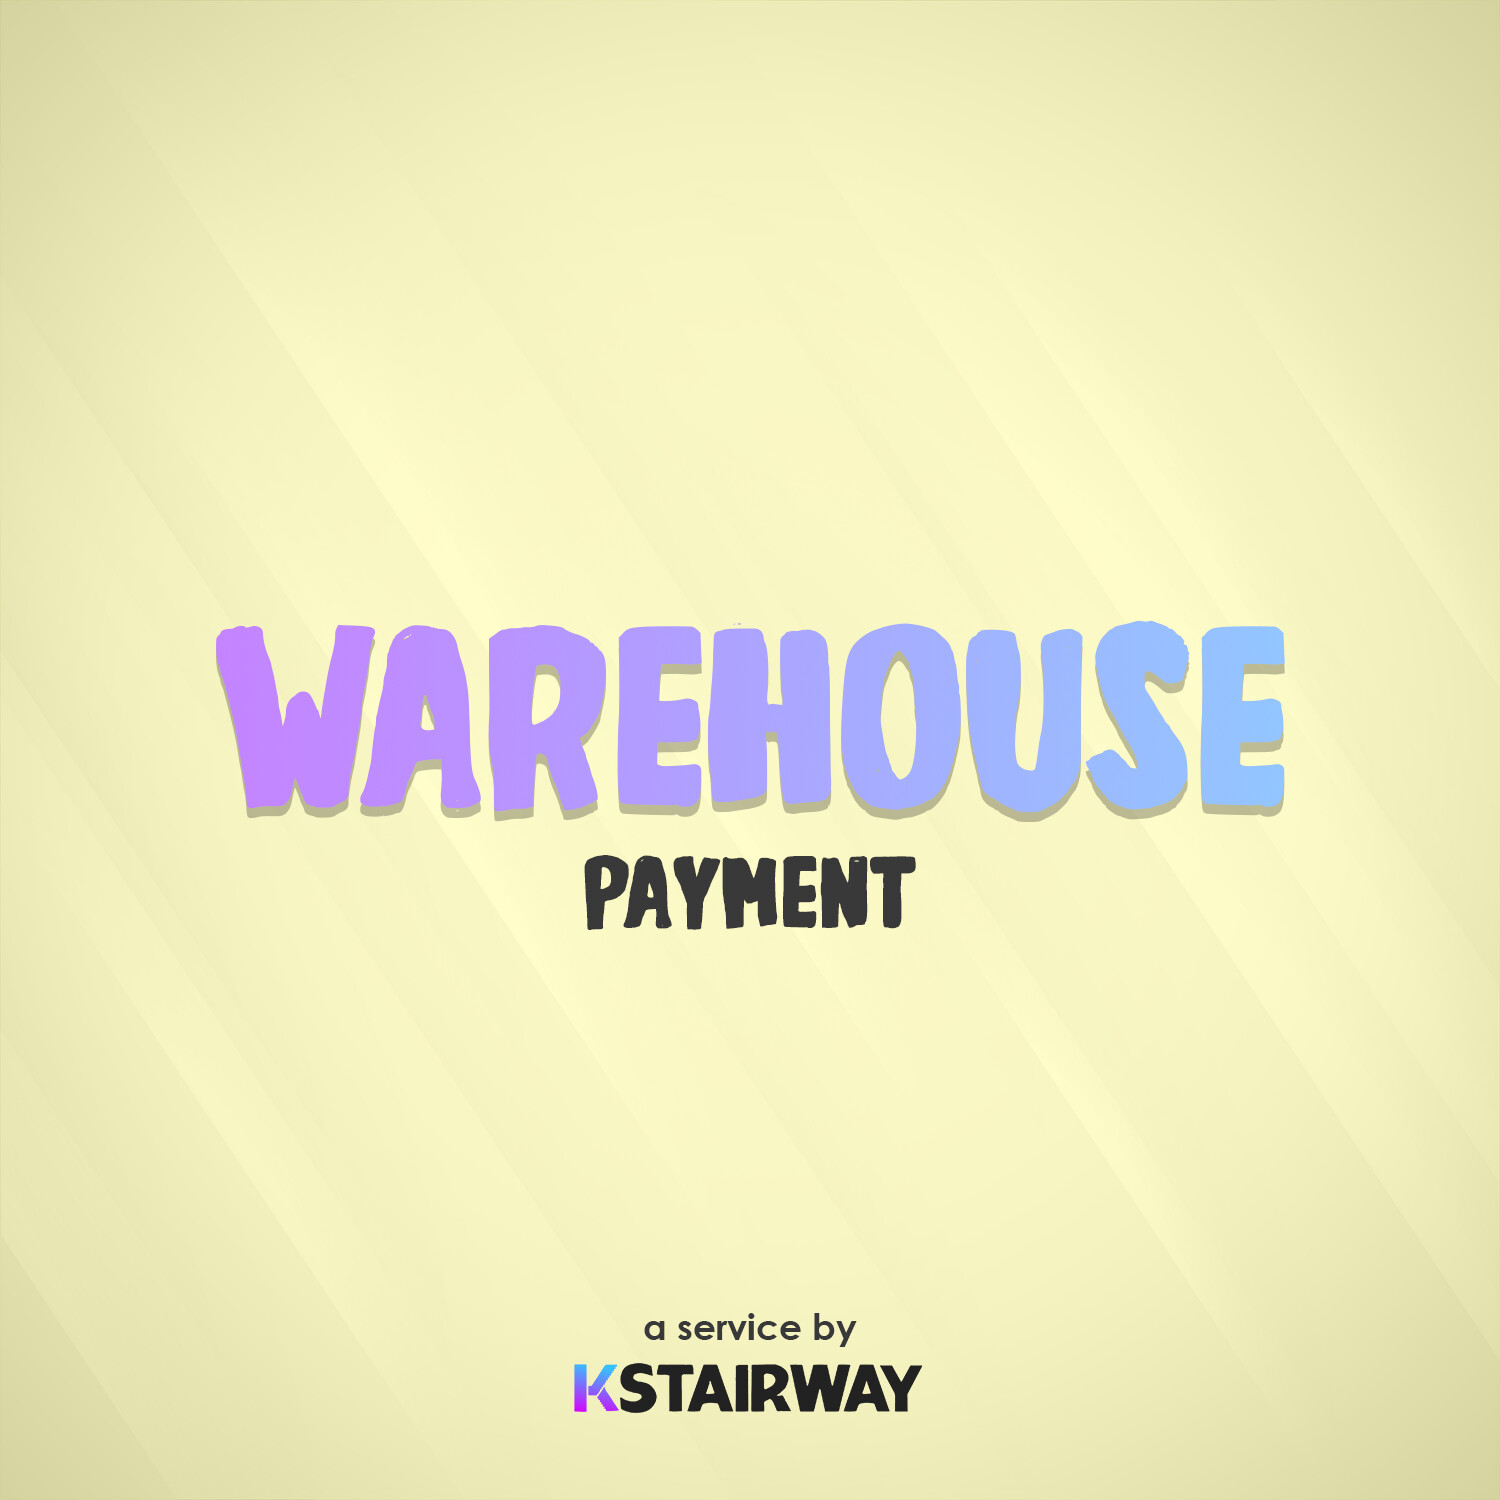 Warehouse Service - Payment